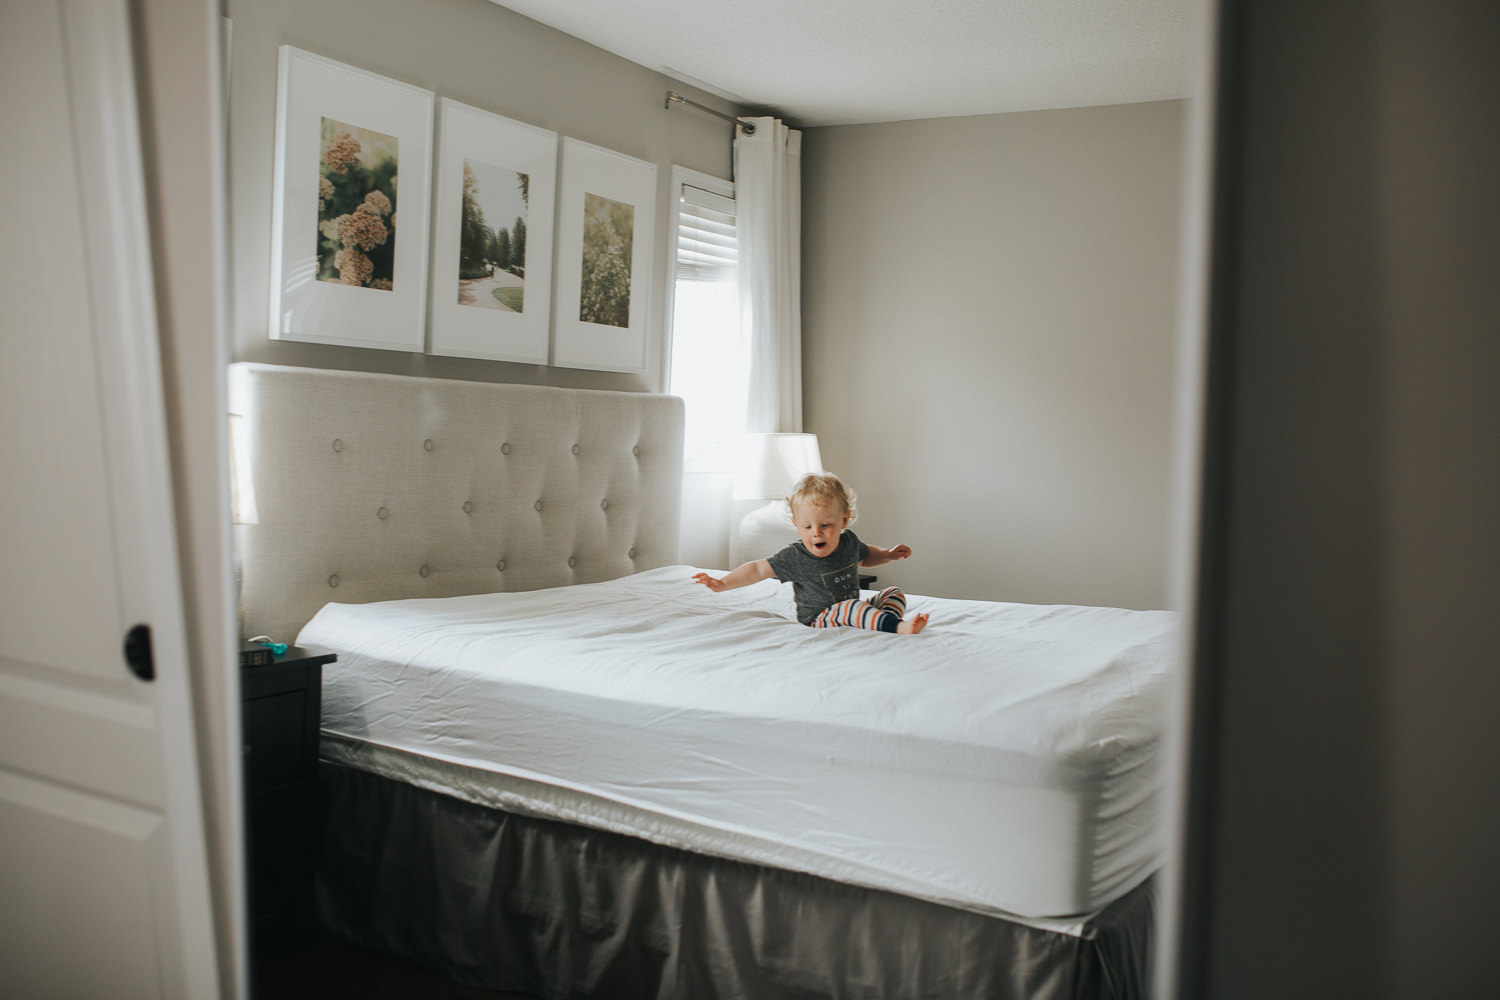 18 month old boy with blonde hair jumping on parent's bed - Stouffville Documentary Photographs